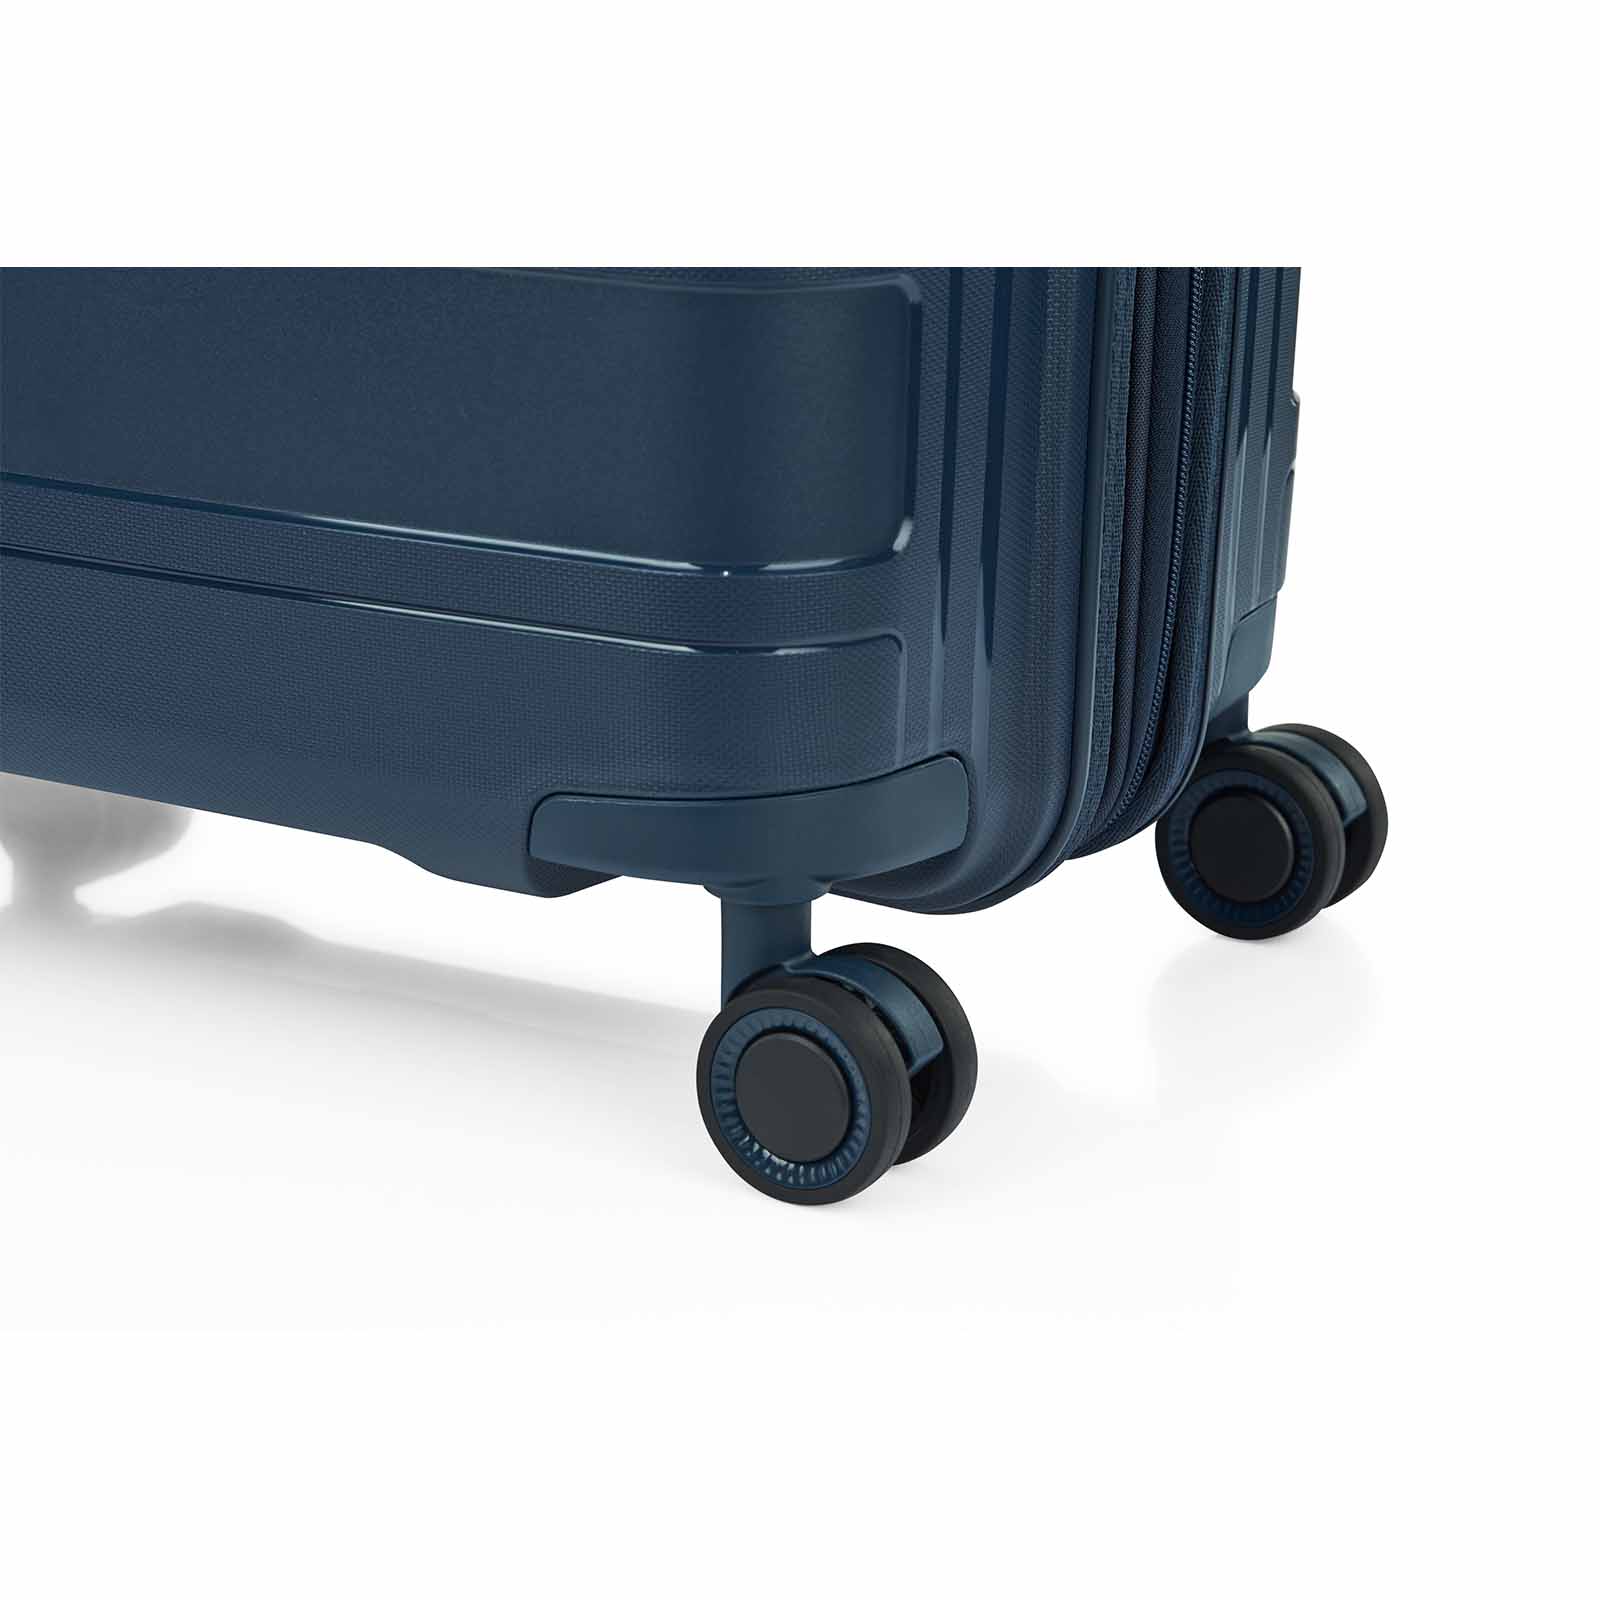 American-Tourister-Light-Max-69cm-Suitcase-Navy-Wheels